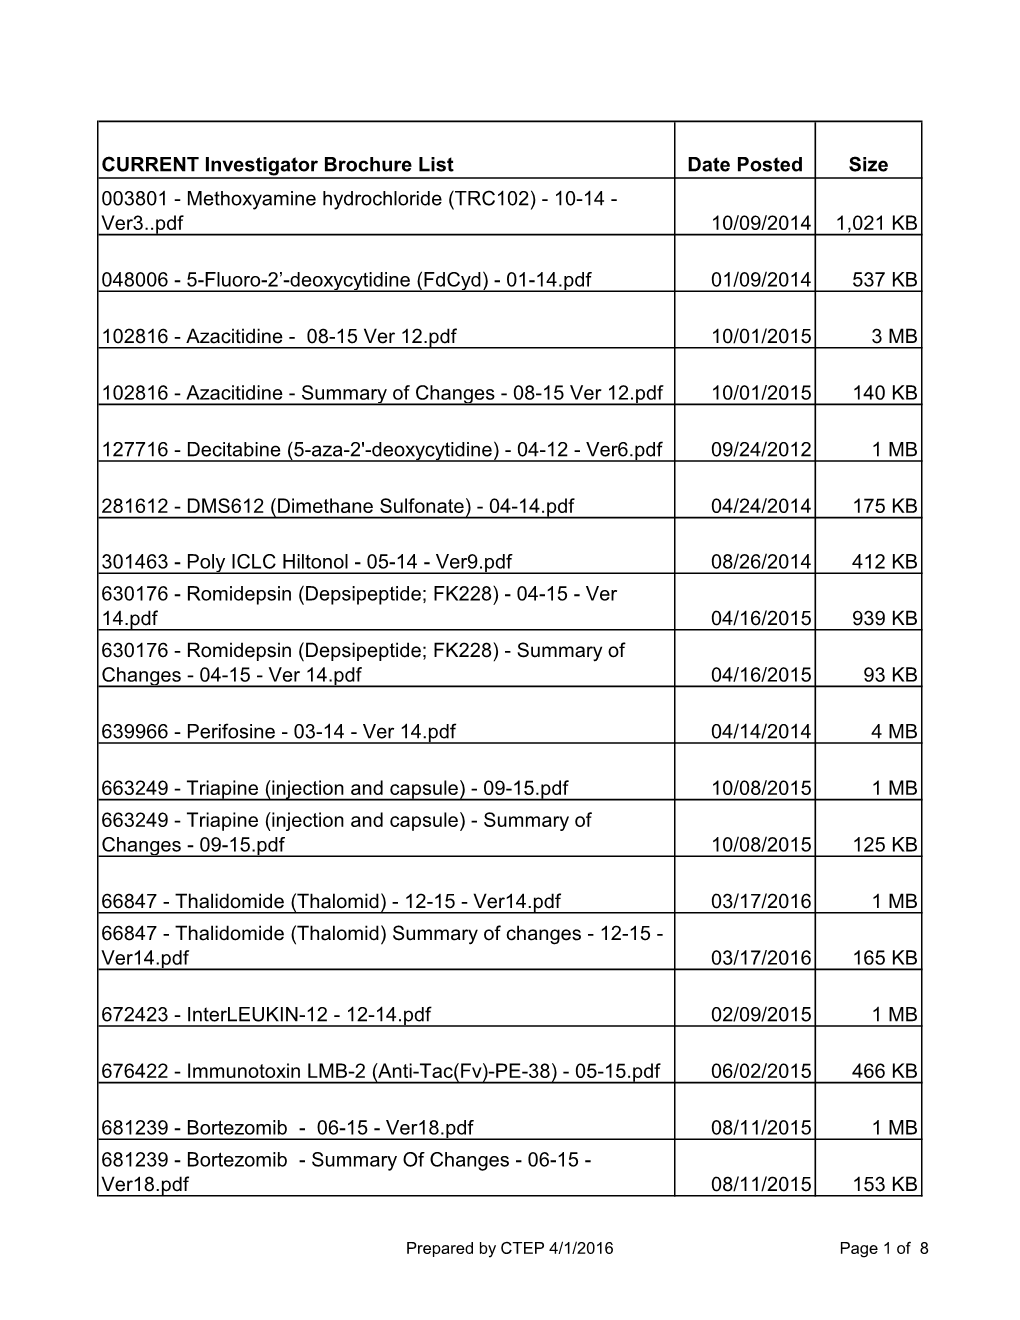 Prepared by CTEP 4/1/2016 Page 1 of 8 CURRENT Investigator Brochure List Date Posted Size